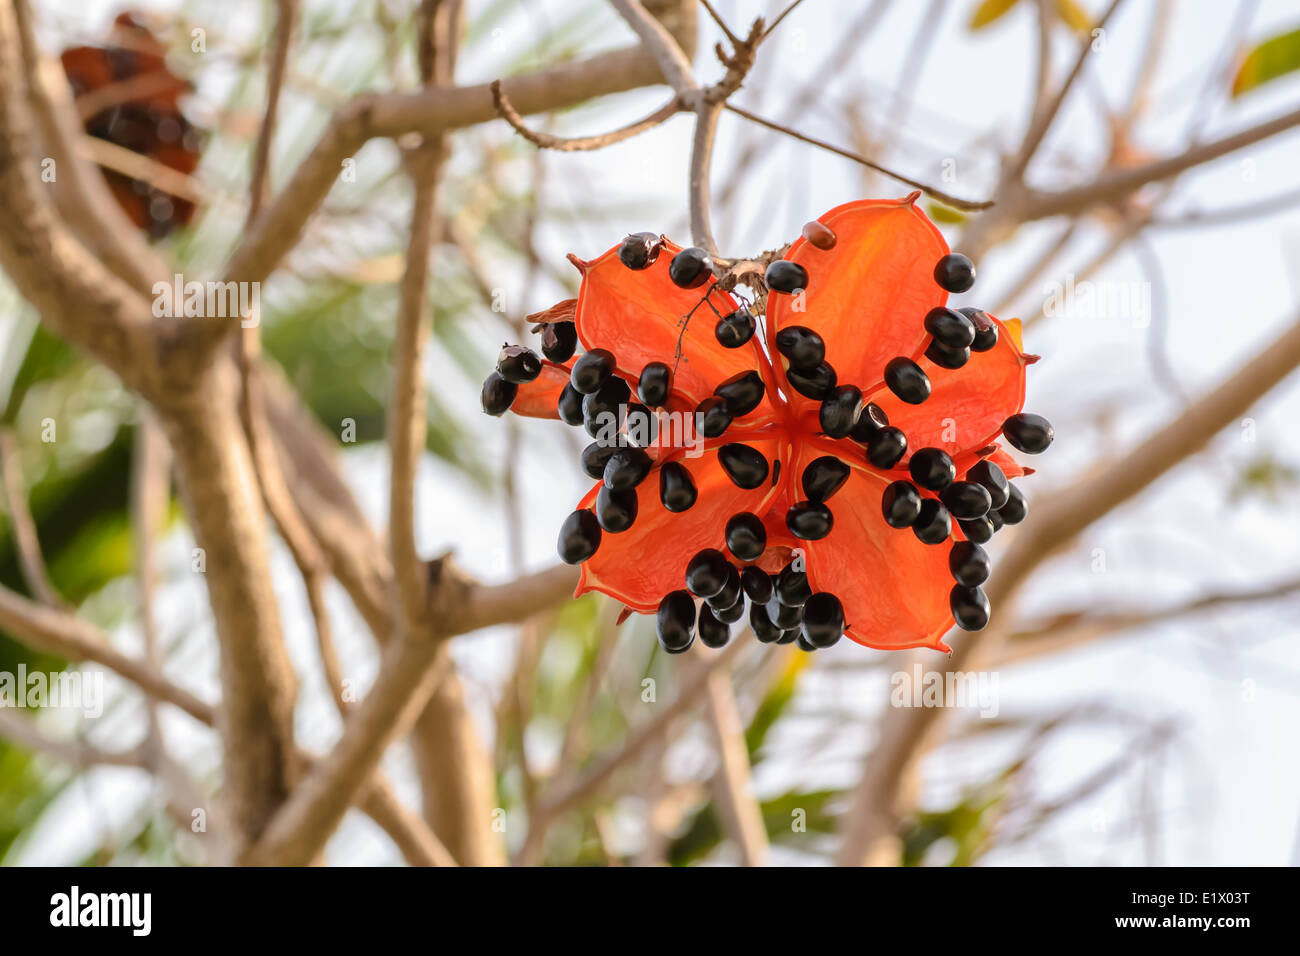 the seed of Sterculia lanceolata tree, it is a tropical plant growth in South Asia. Stock Photo